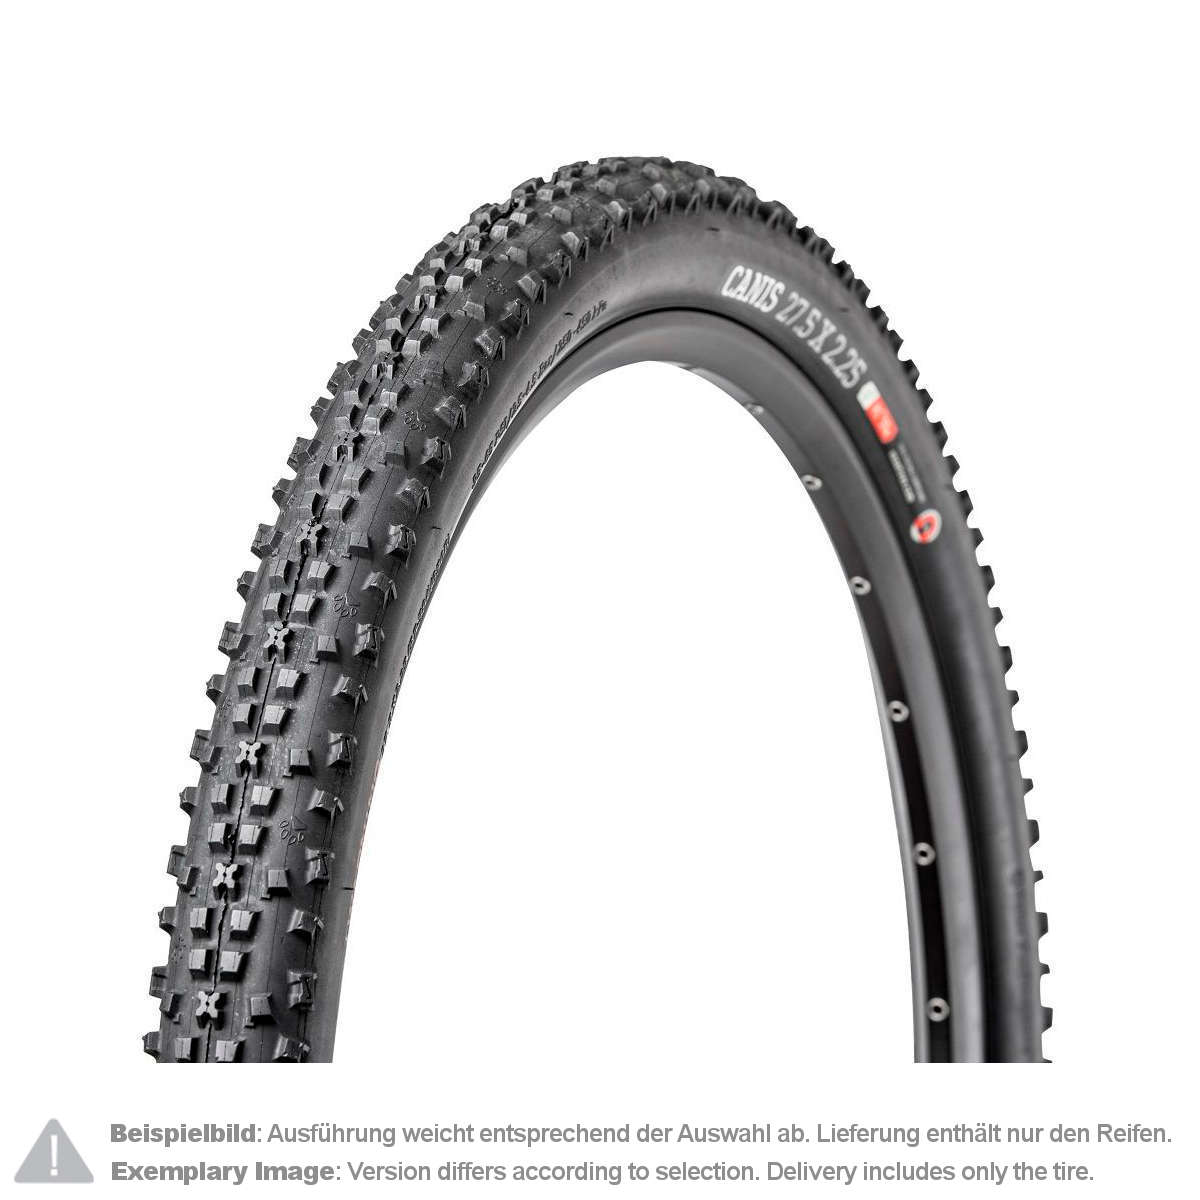 Onza MTB Tire Canis Black, 29 x 2.25 Inch, Tubeless Ready, 60 TPI, FRC, 65a/55a, Foldable